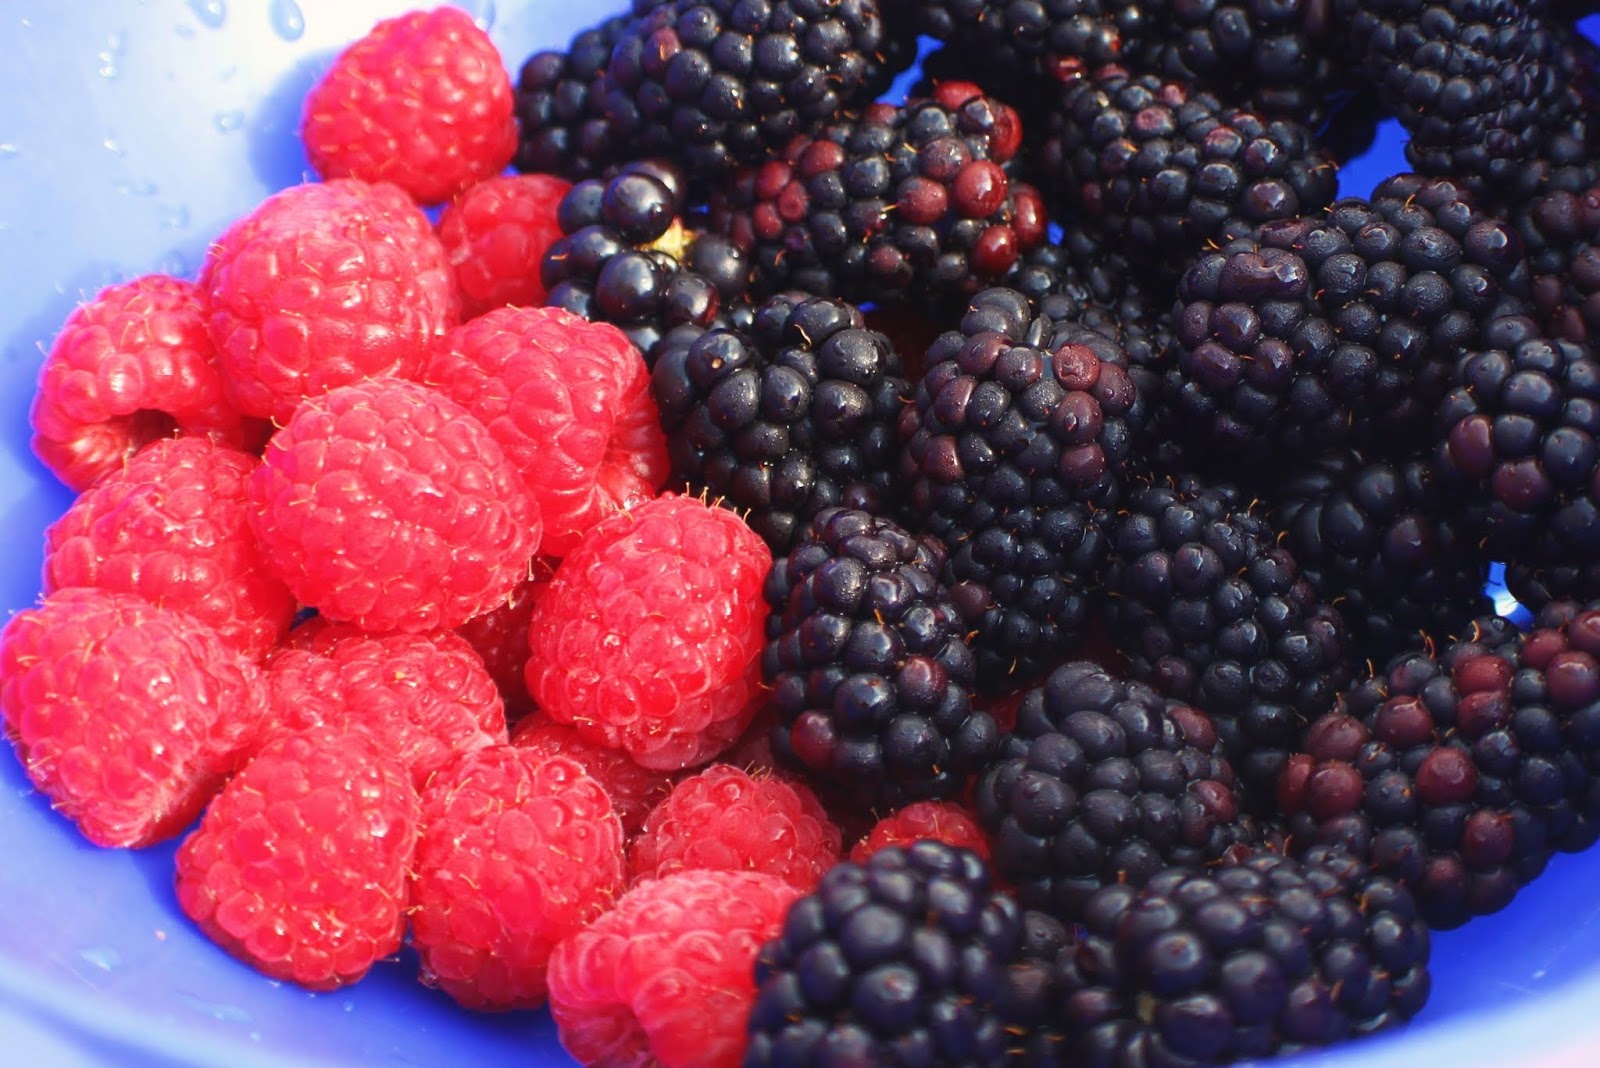  fresh fruits and berries these are raspberries and blackberries fresh for topping cupcakes